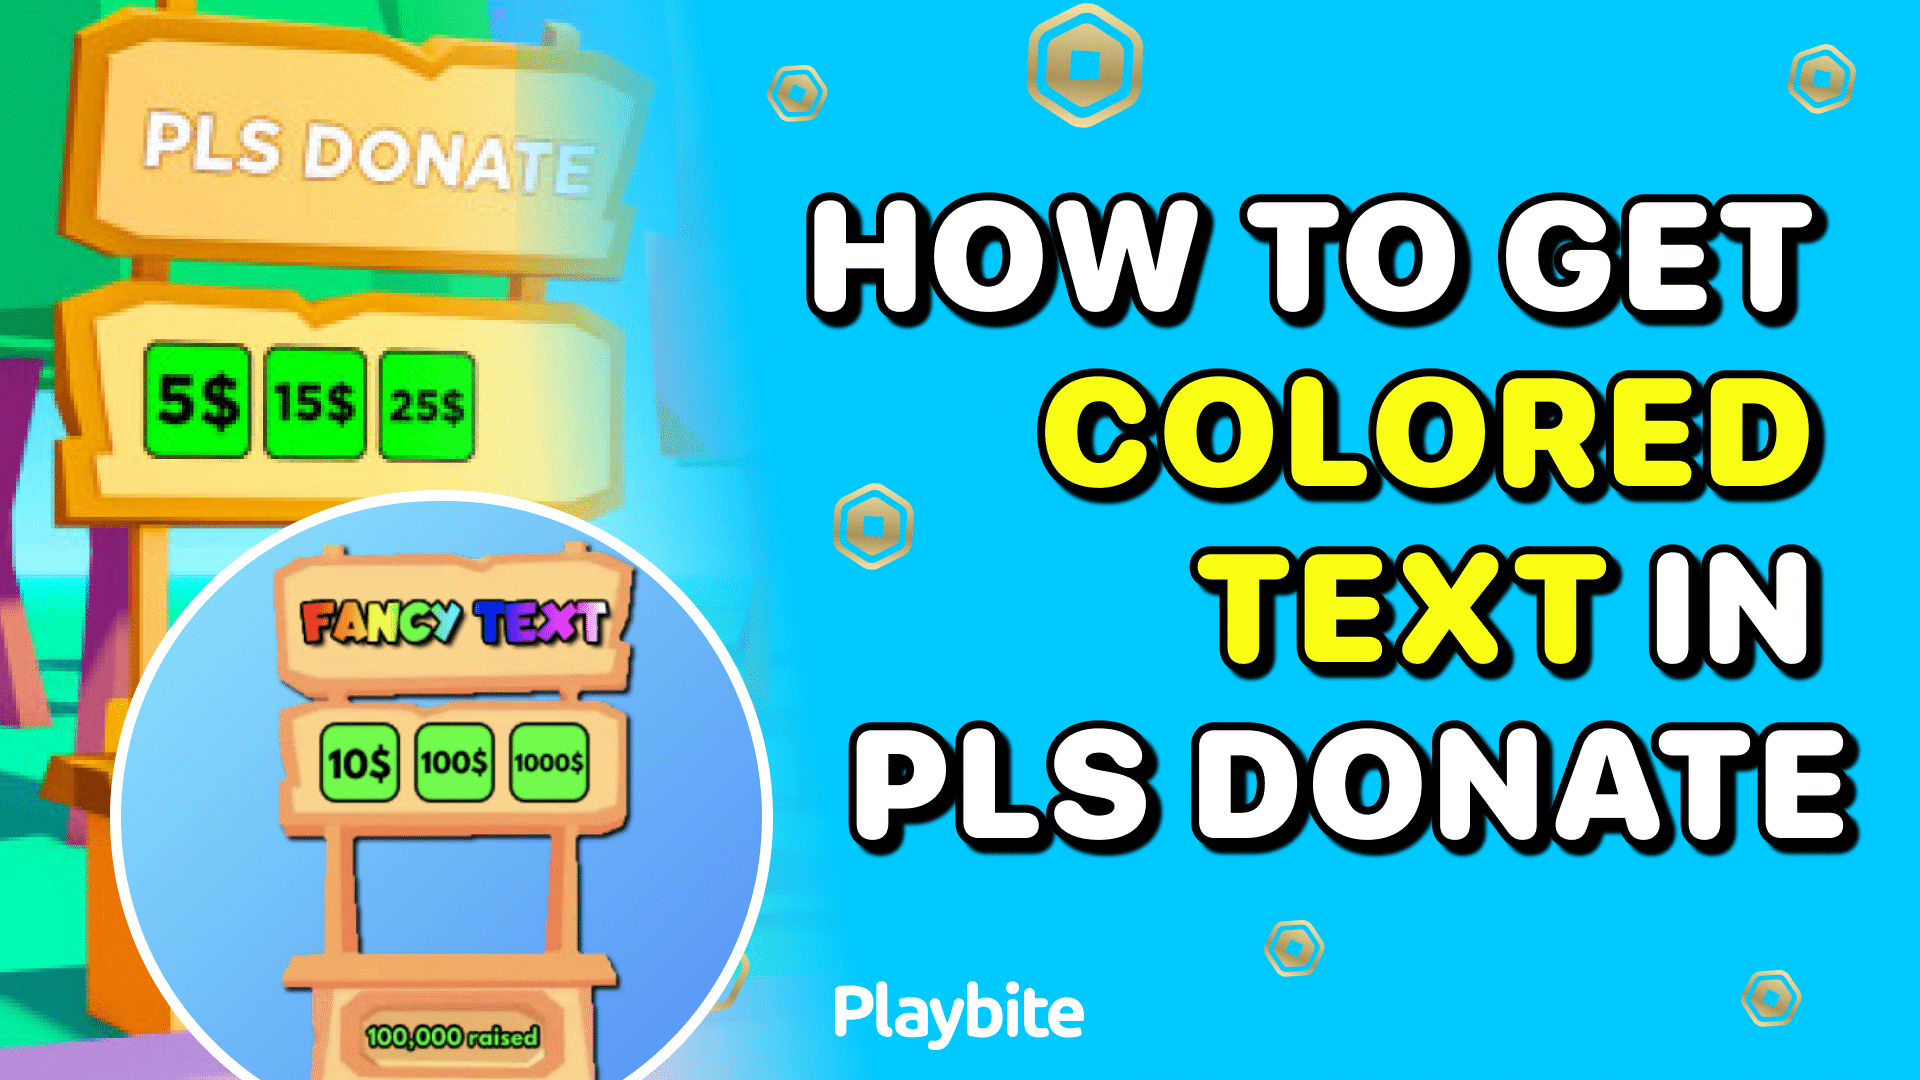 How To Get Colored Text In PLS DONATE